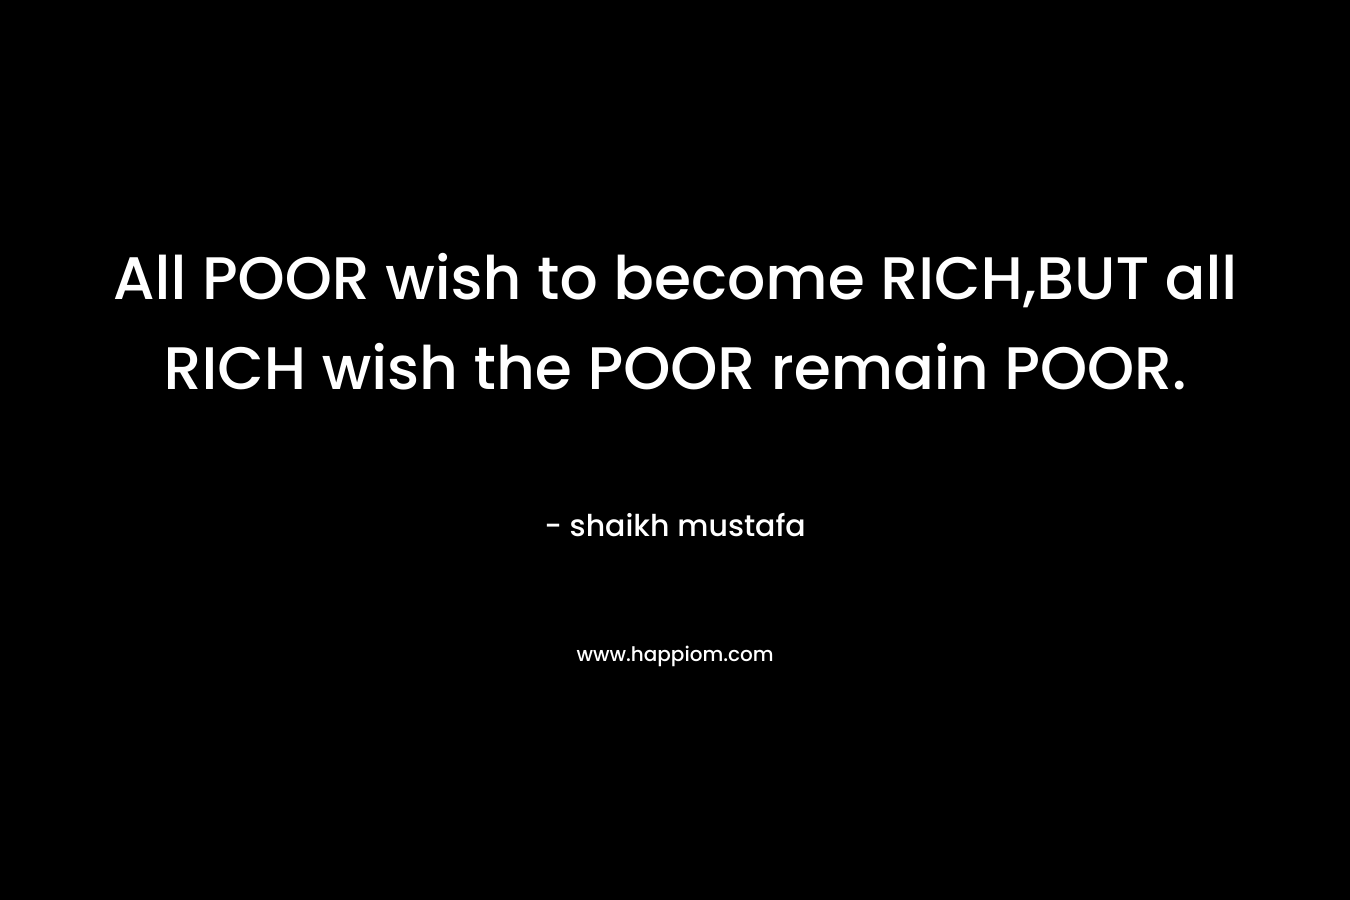 All POOR wish to become RICH,BUT all RICH wish the POOR remain POOR.